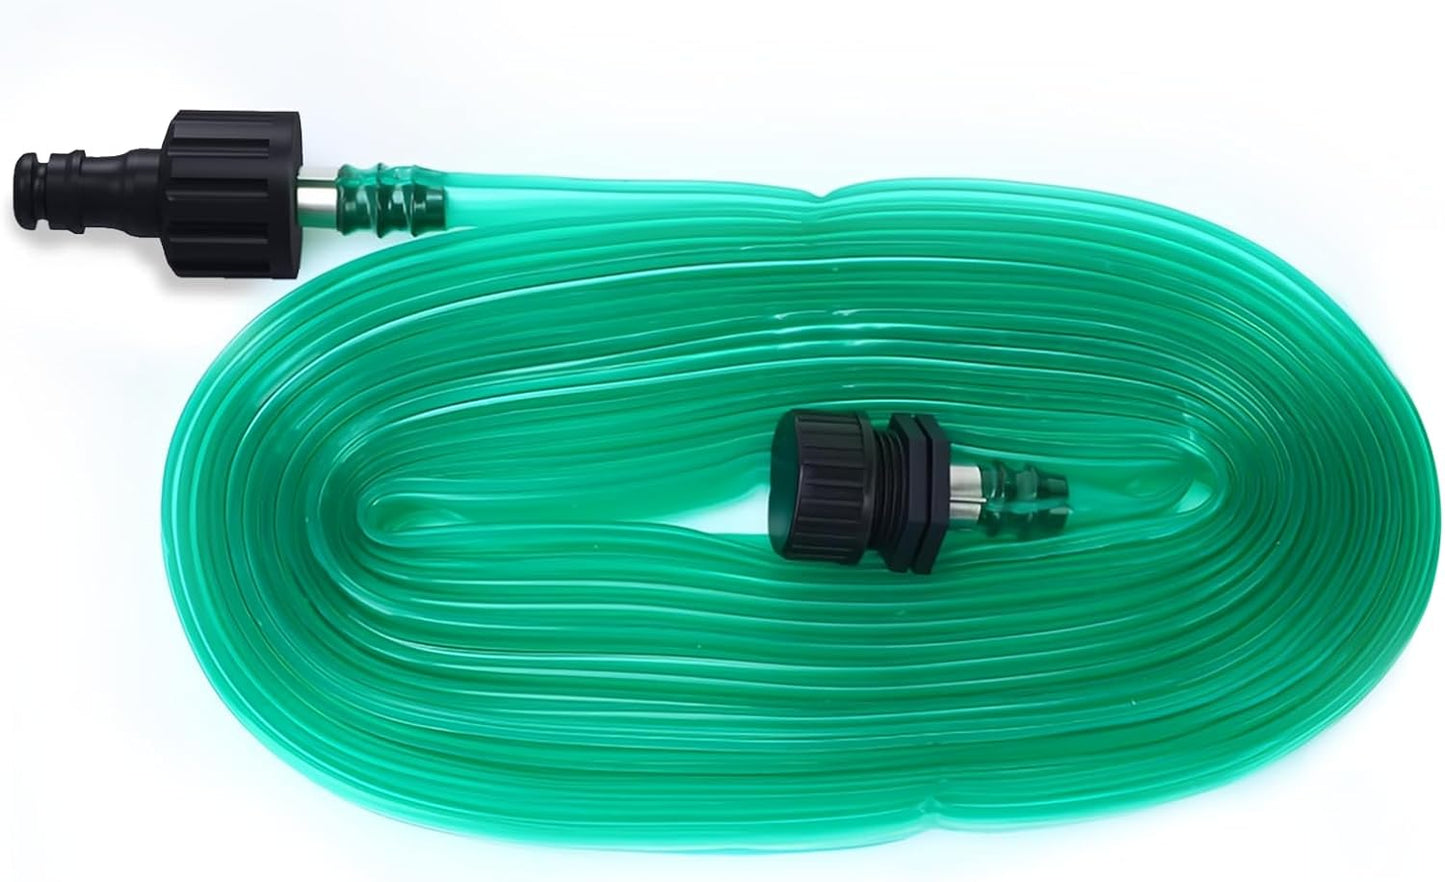 50FT Linkable Flat Soaker Hose - Efficient Drip Irrigation, Save 80% Water, Leakproof and Easy to Install,Perfect for Gardens Vegetable Flower Beds, Shrubs, and Trees